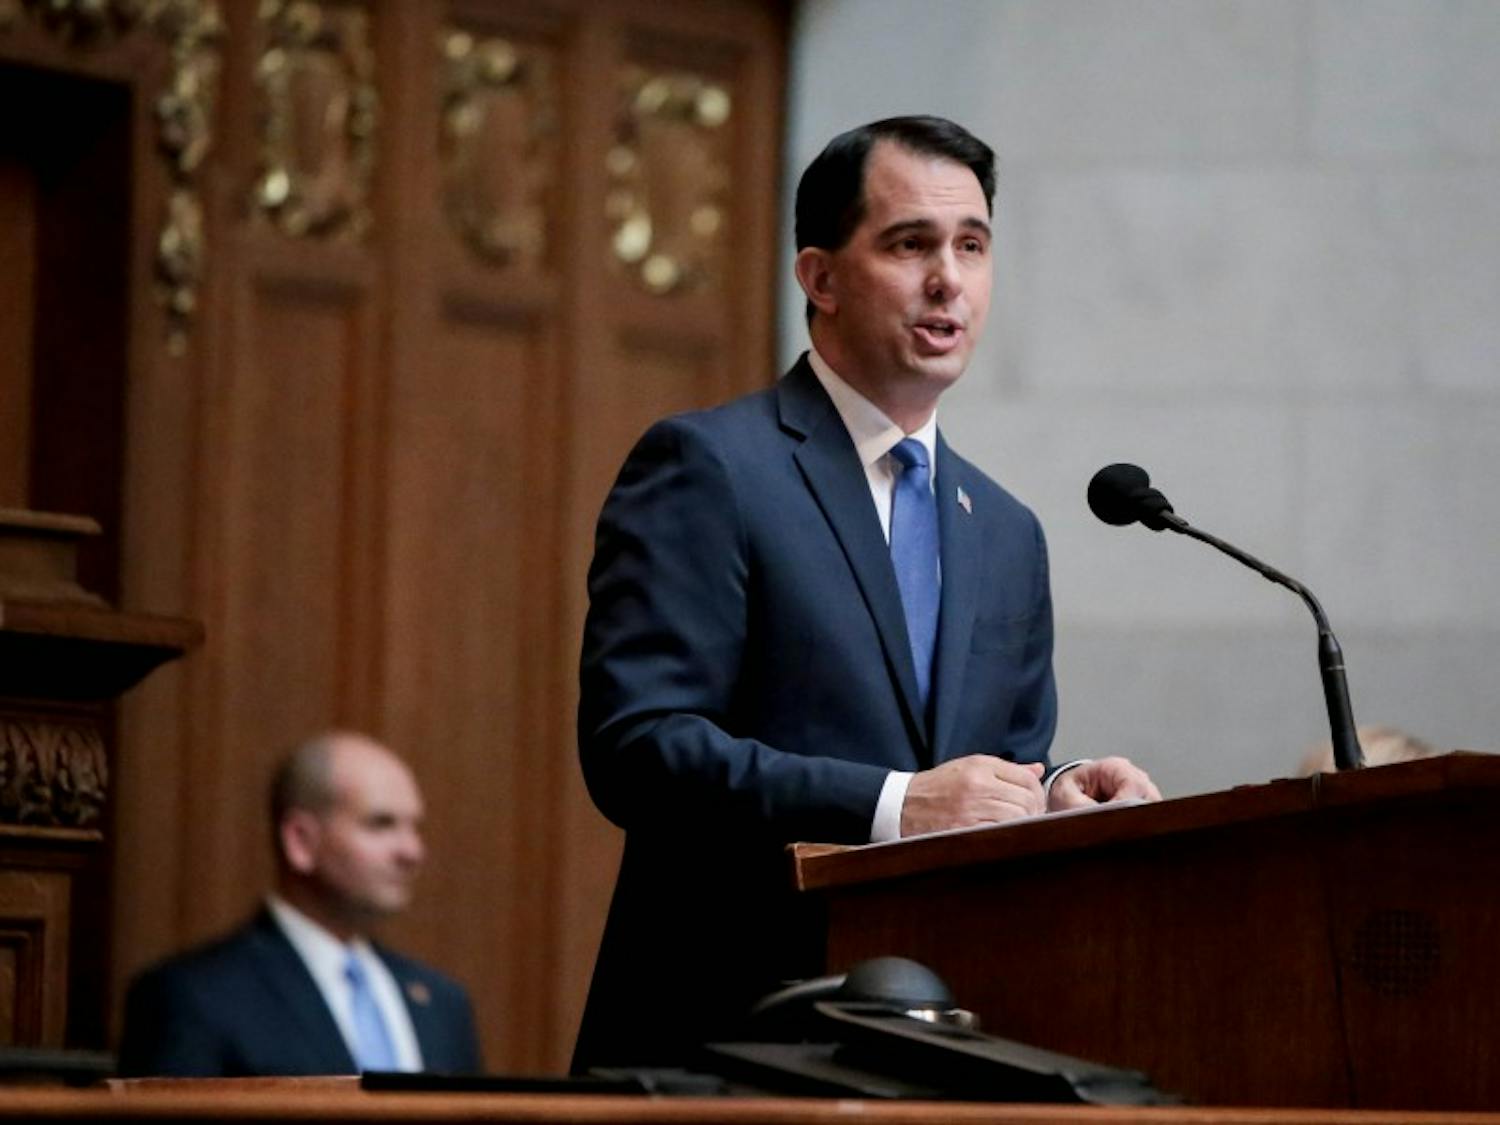 Public employees will no longer be able to access abortion through their state healthcare plan under a bill Gov. Scott Walker signed into law Tuesday.